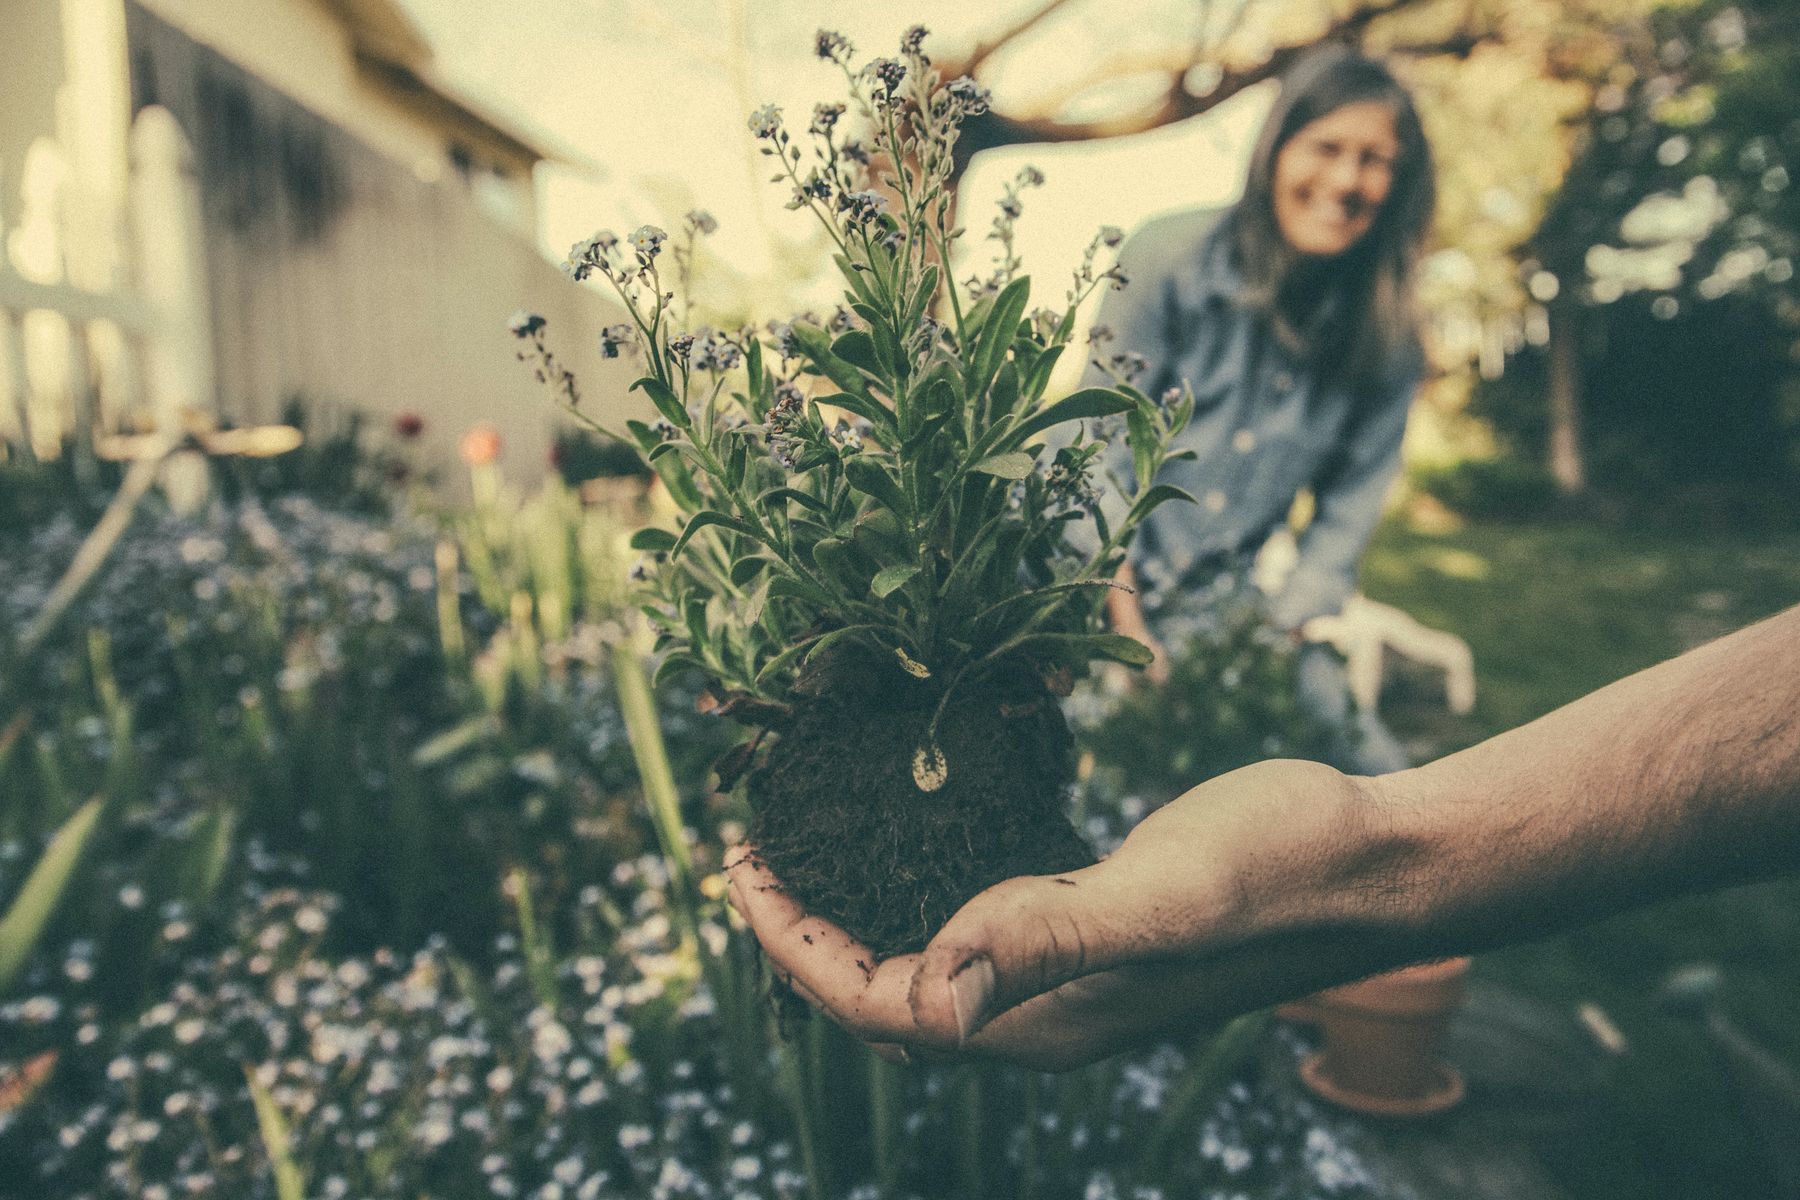 How to best maintain your garden in a rental